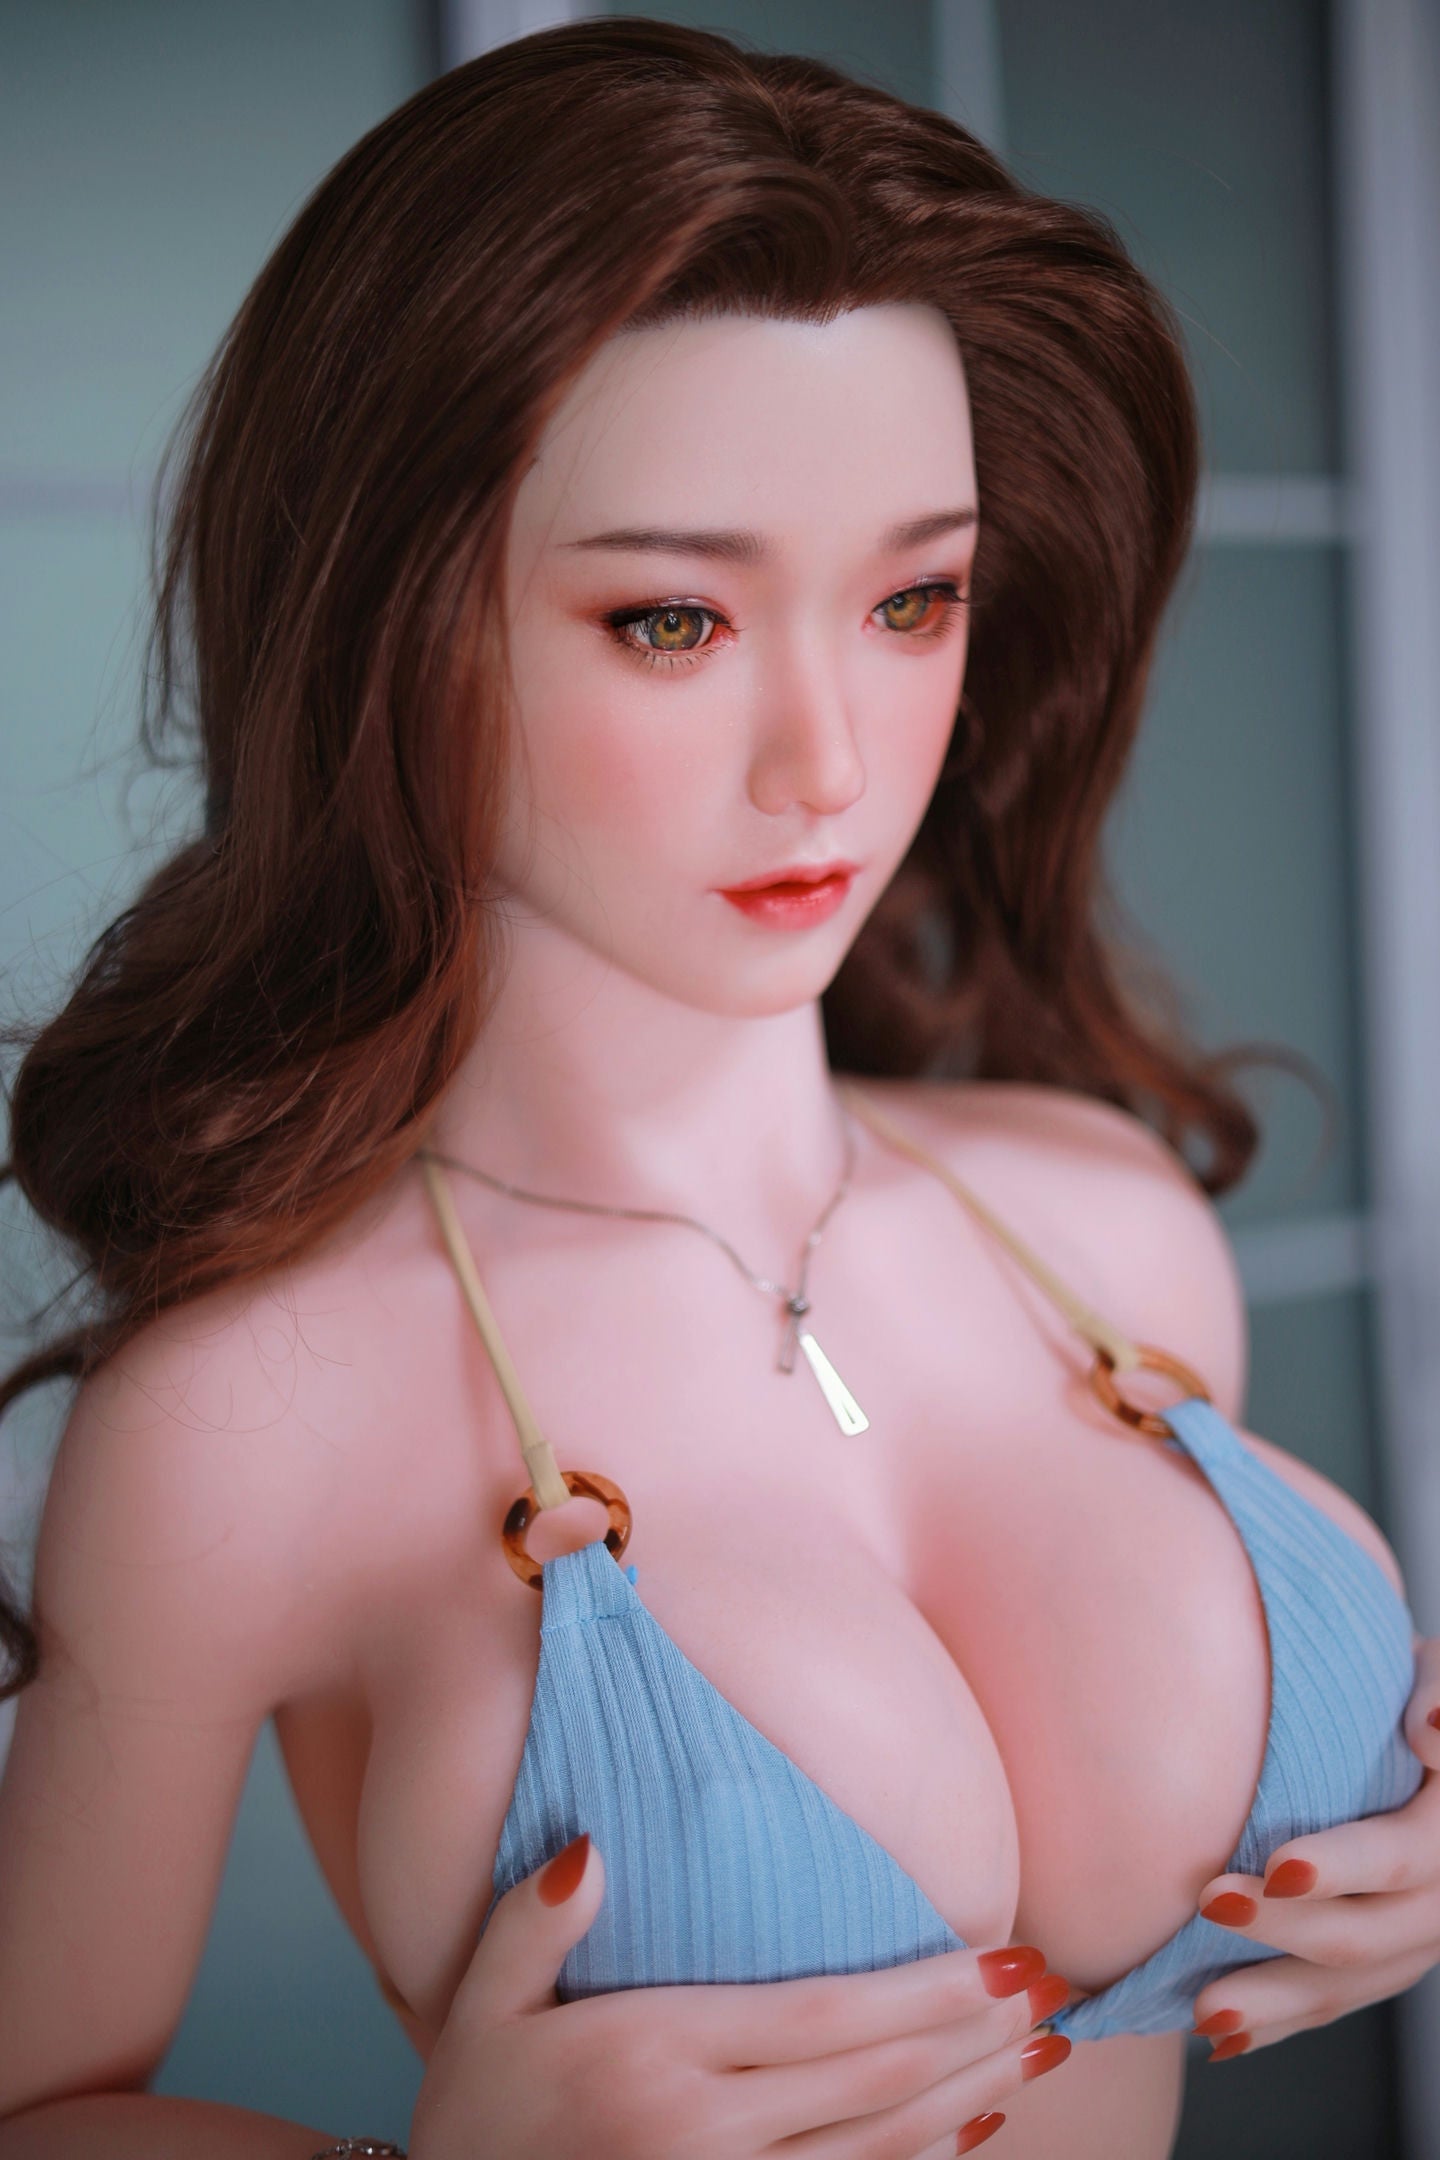 JY Doll 157cm G Cup - Head S95 - Silicone